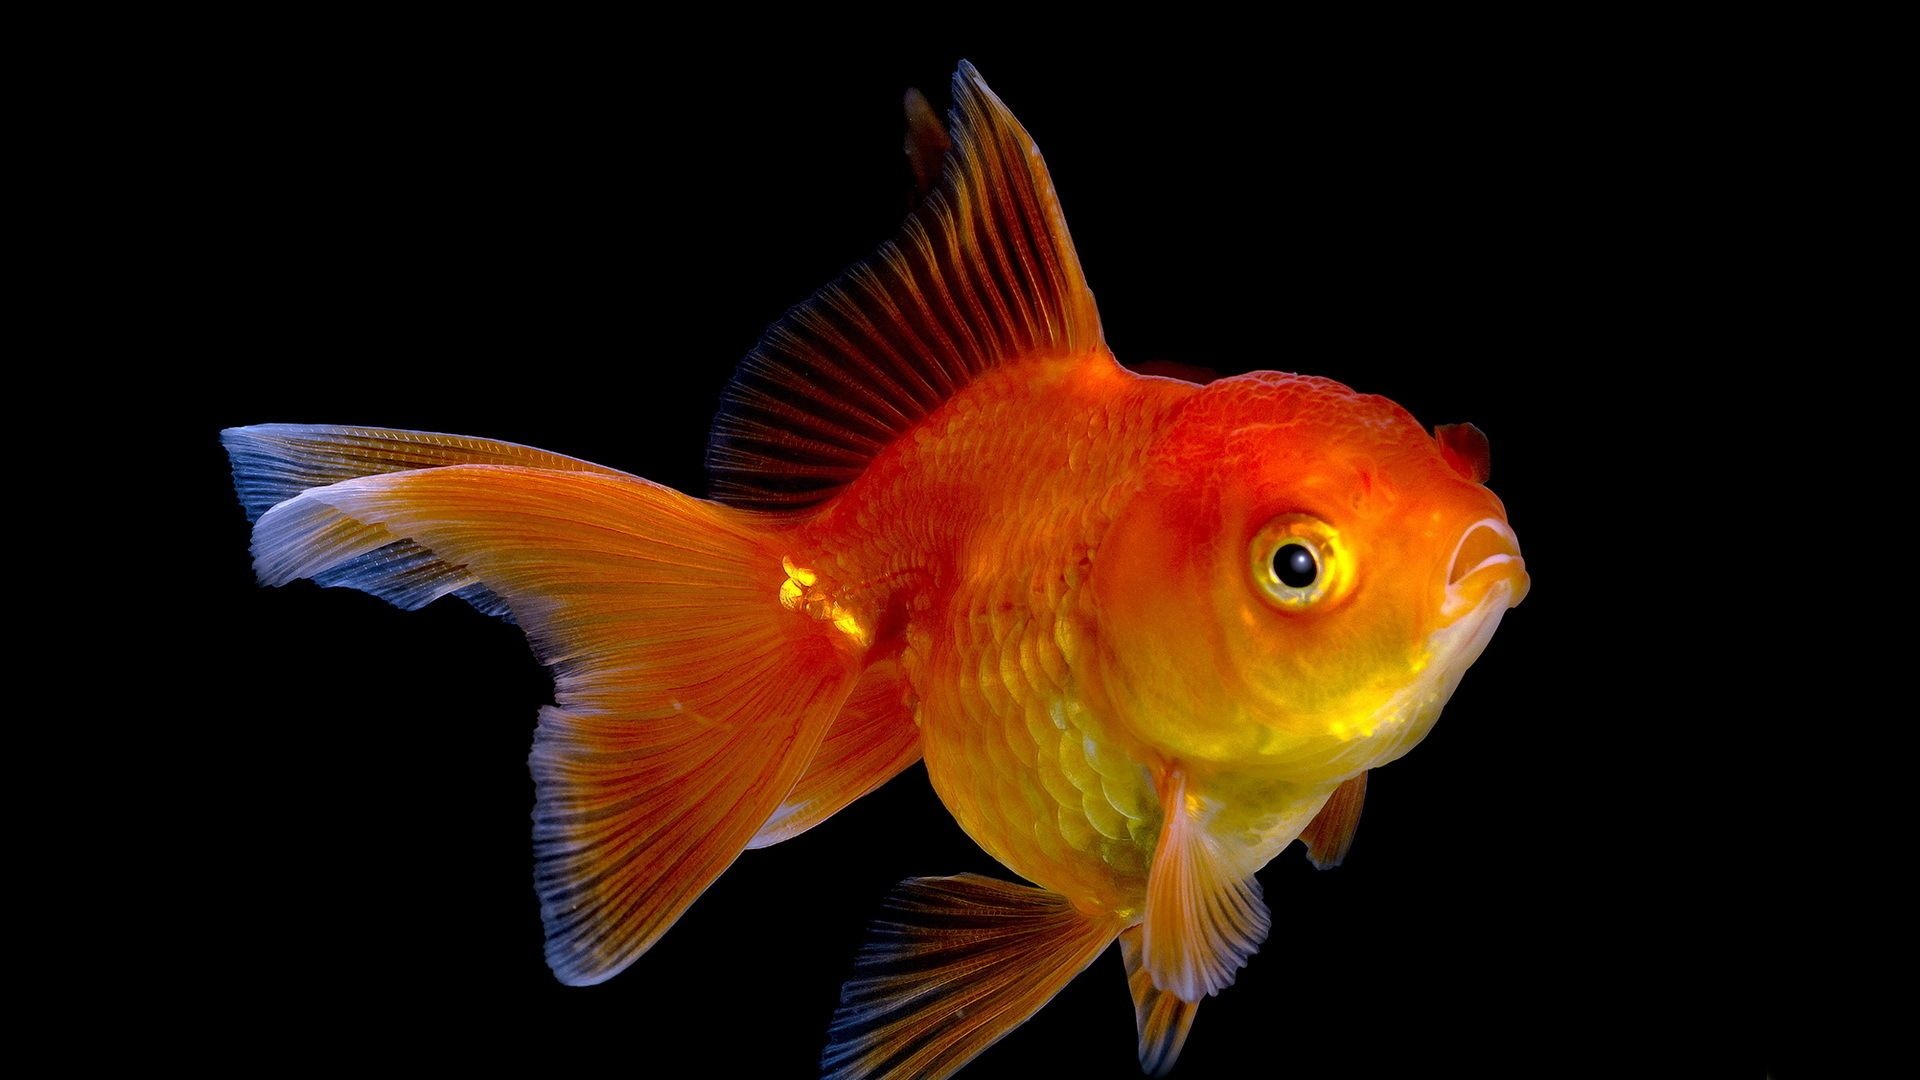 Goldfish: The species were first introduced to North America around 1850. 1920x1080 Full HD Wallpaper.